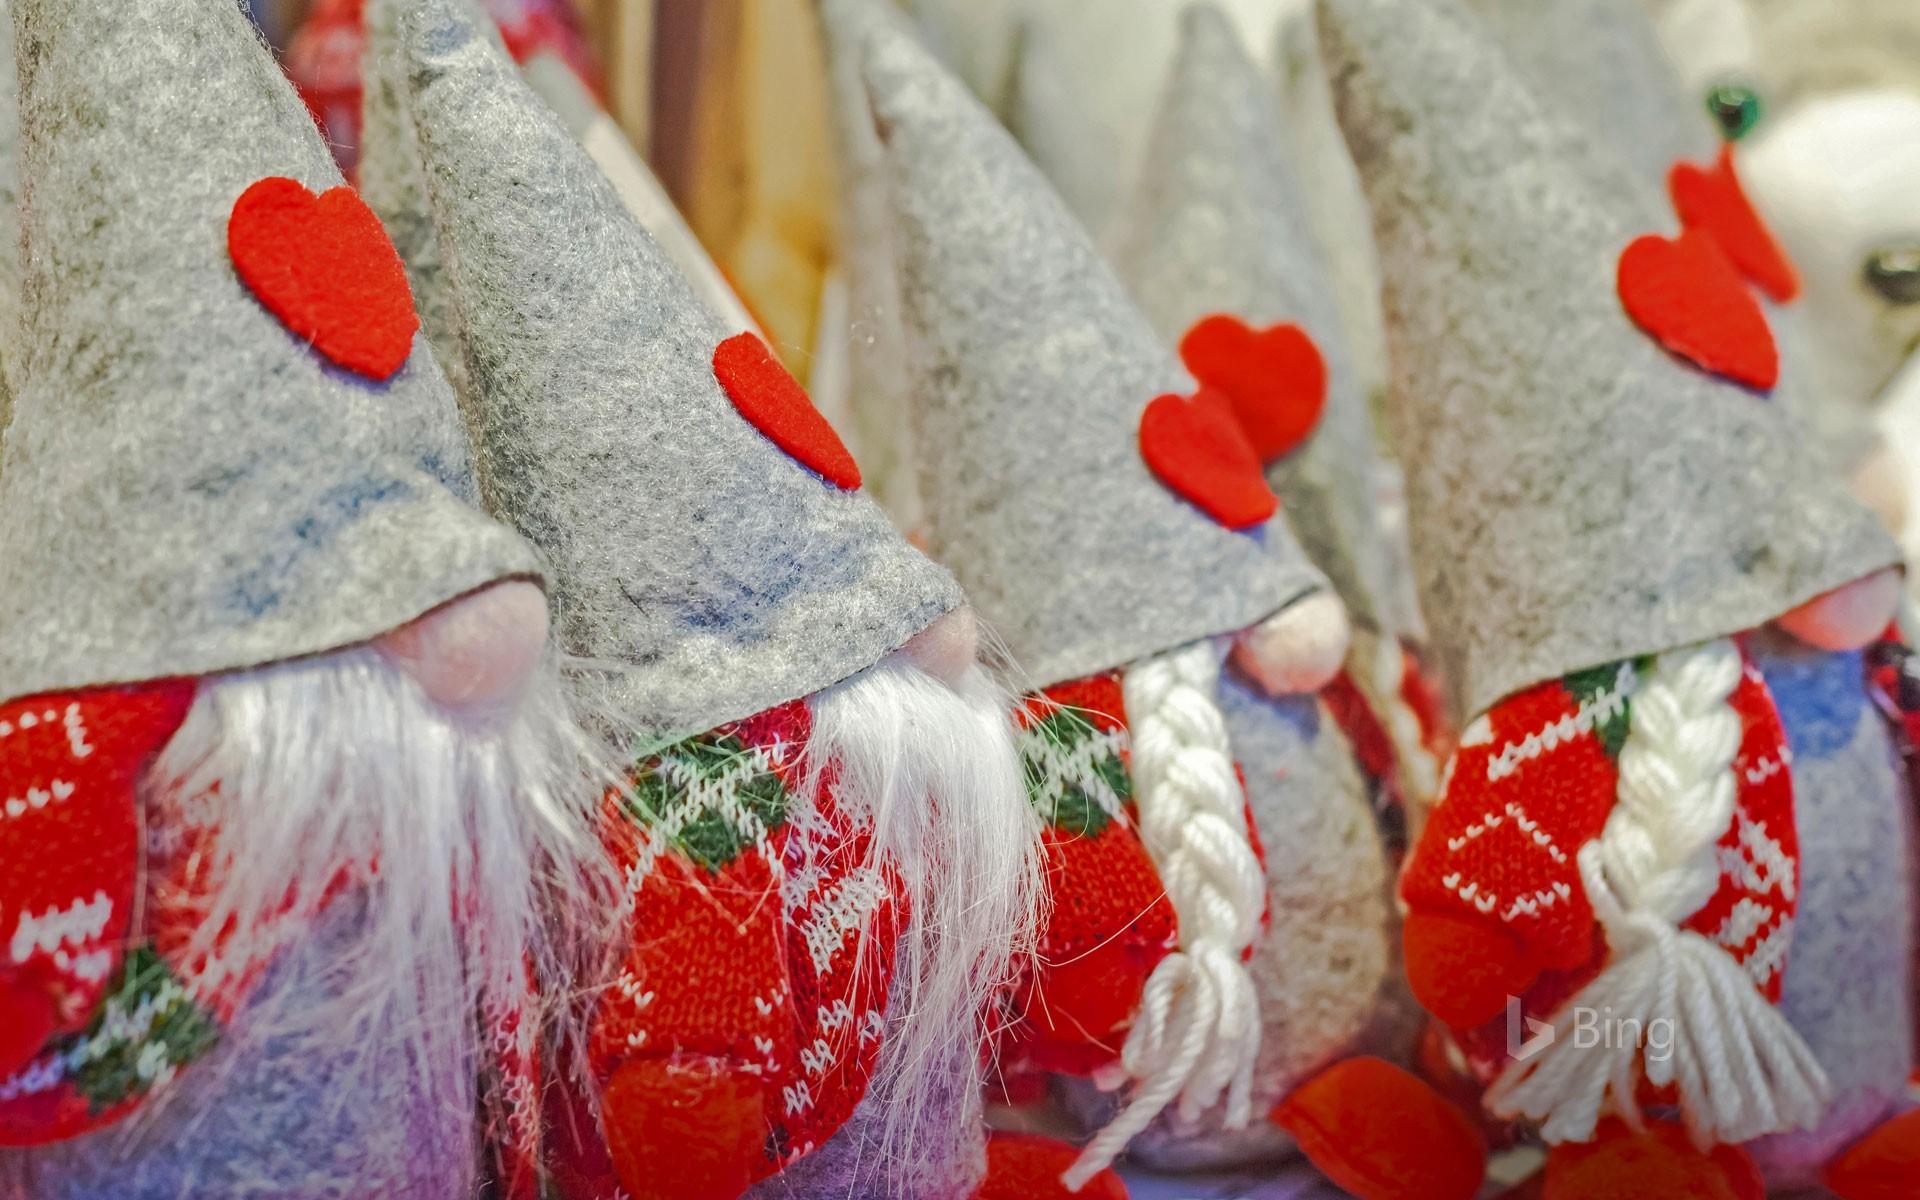 Gnomes for sale at a Christmas market in Pergine Valsugana, Italy